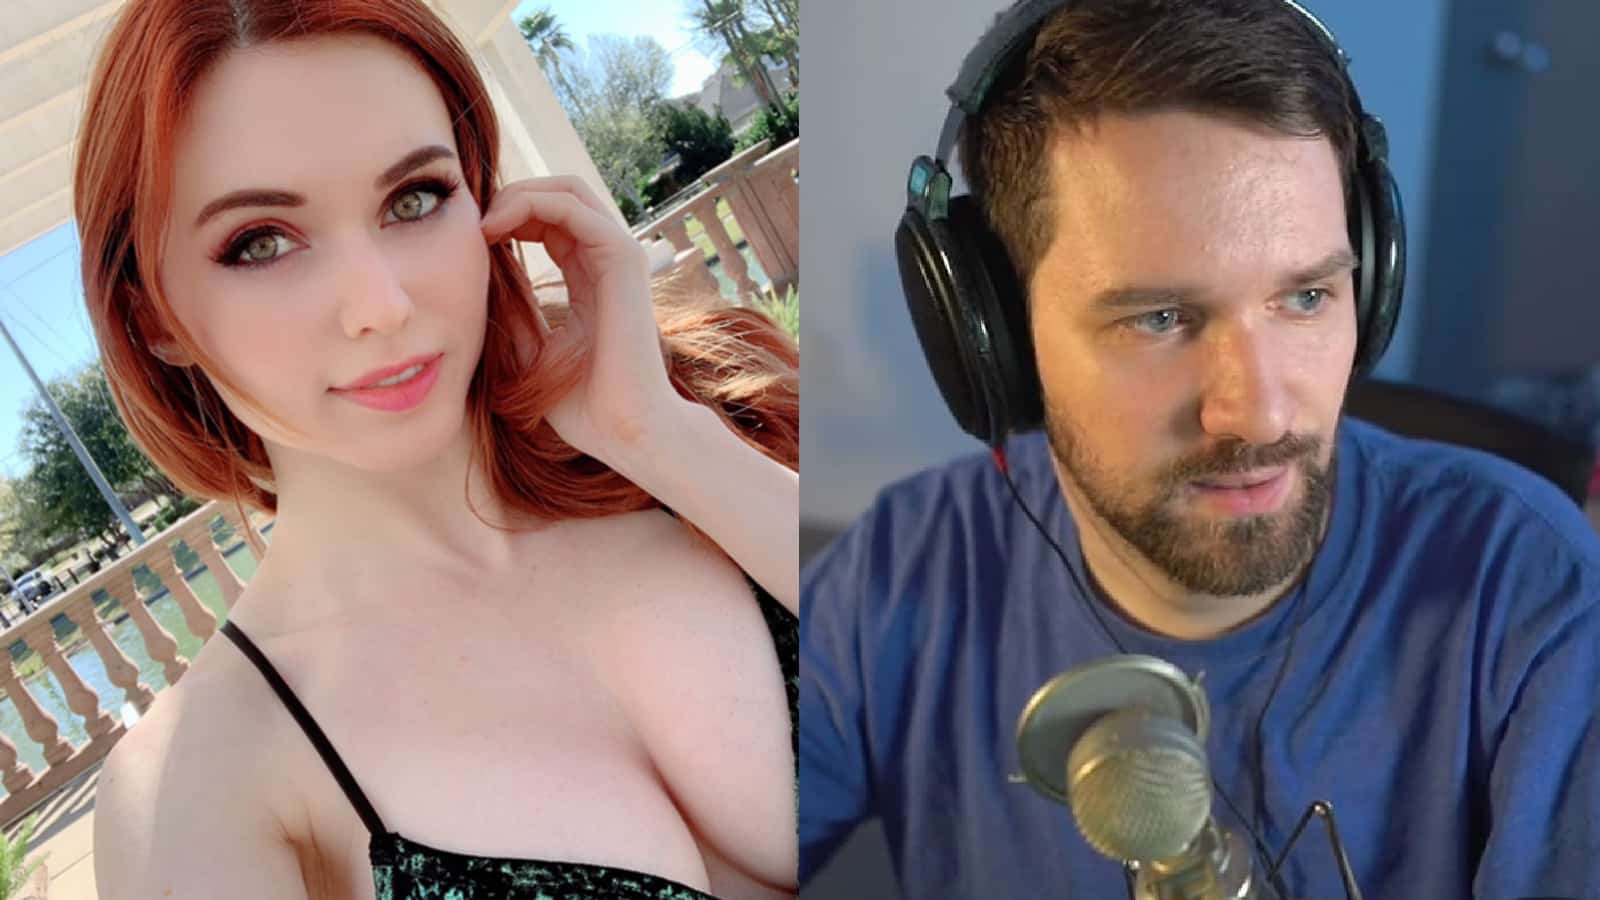 Destiny on Twitch and Amouranth